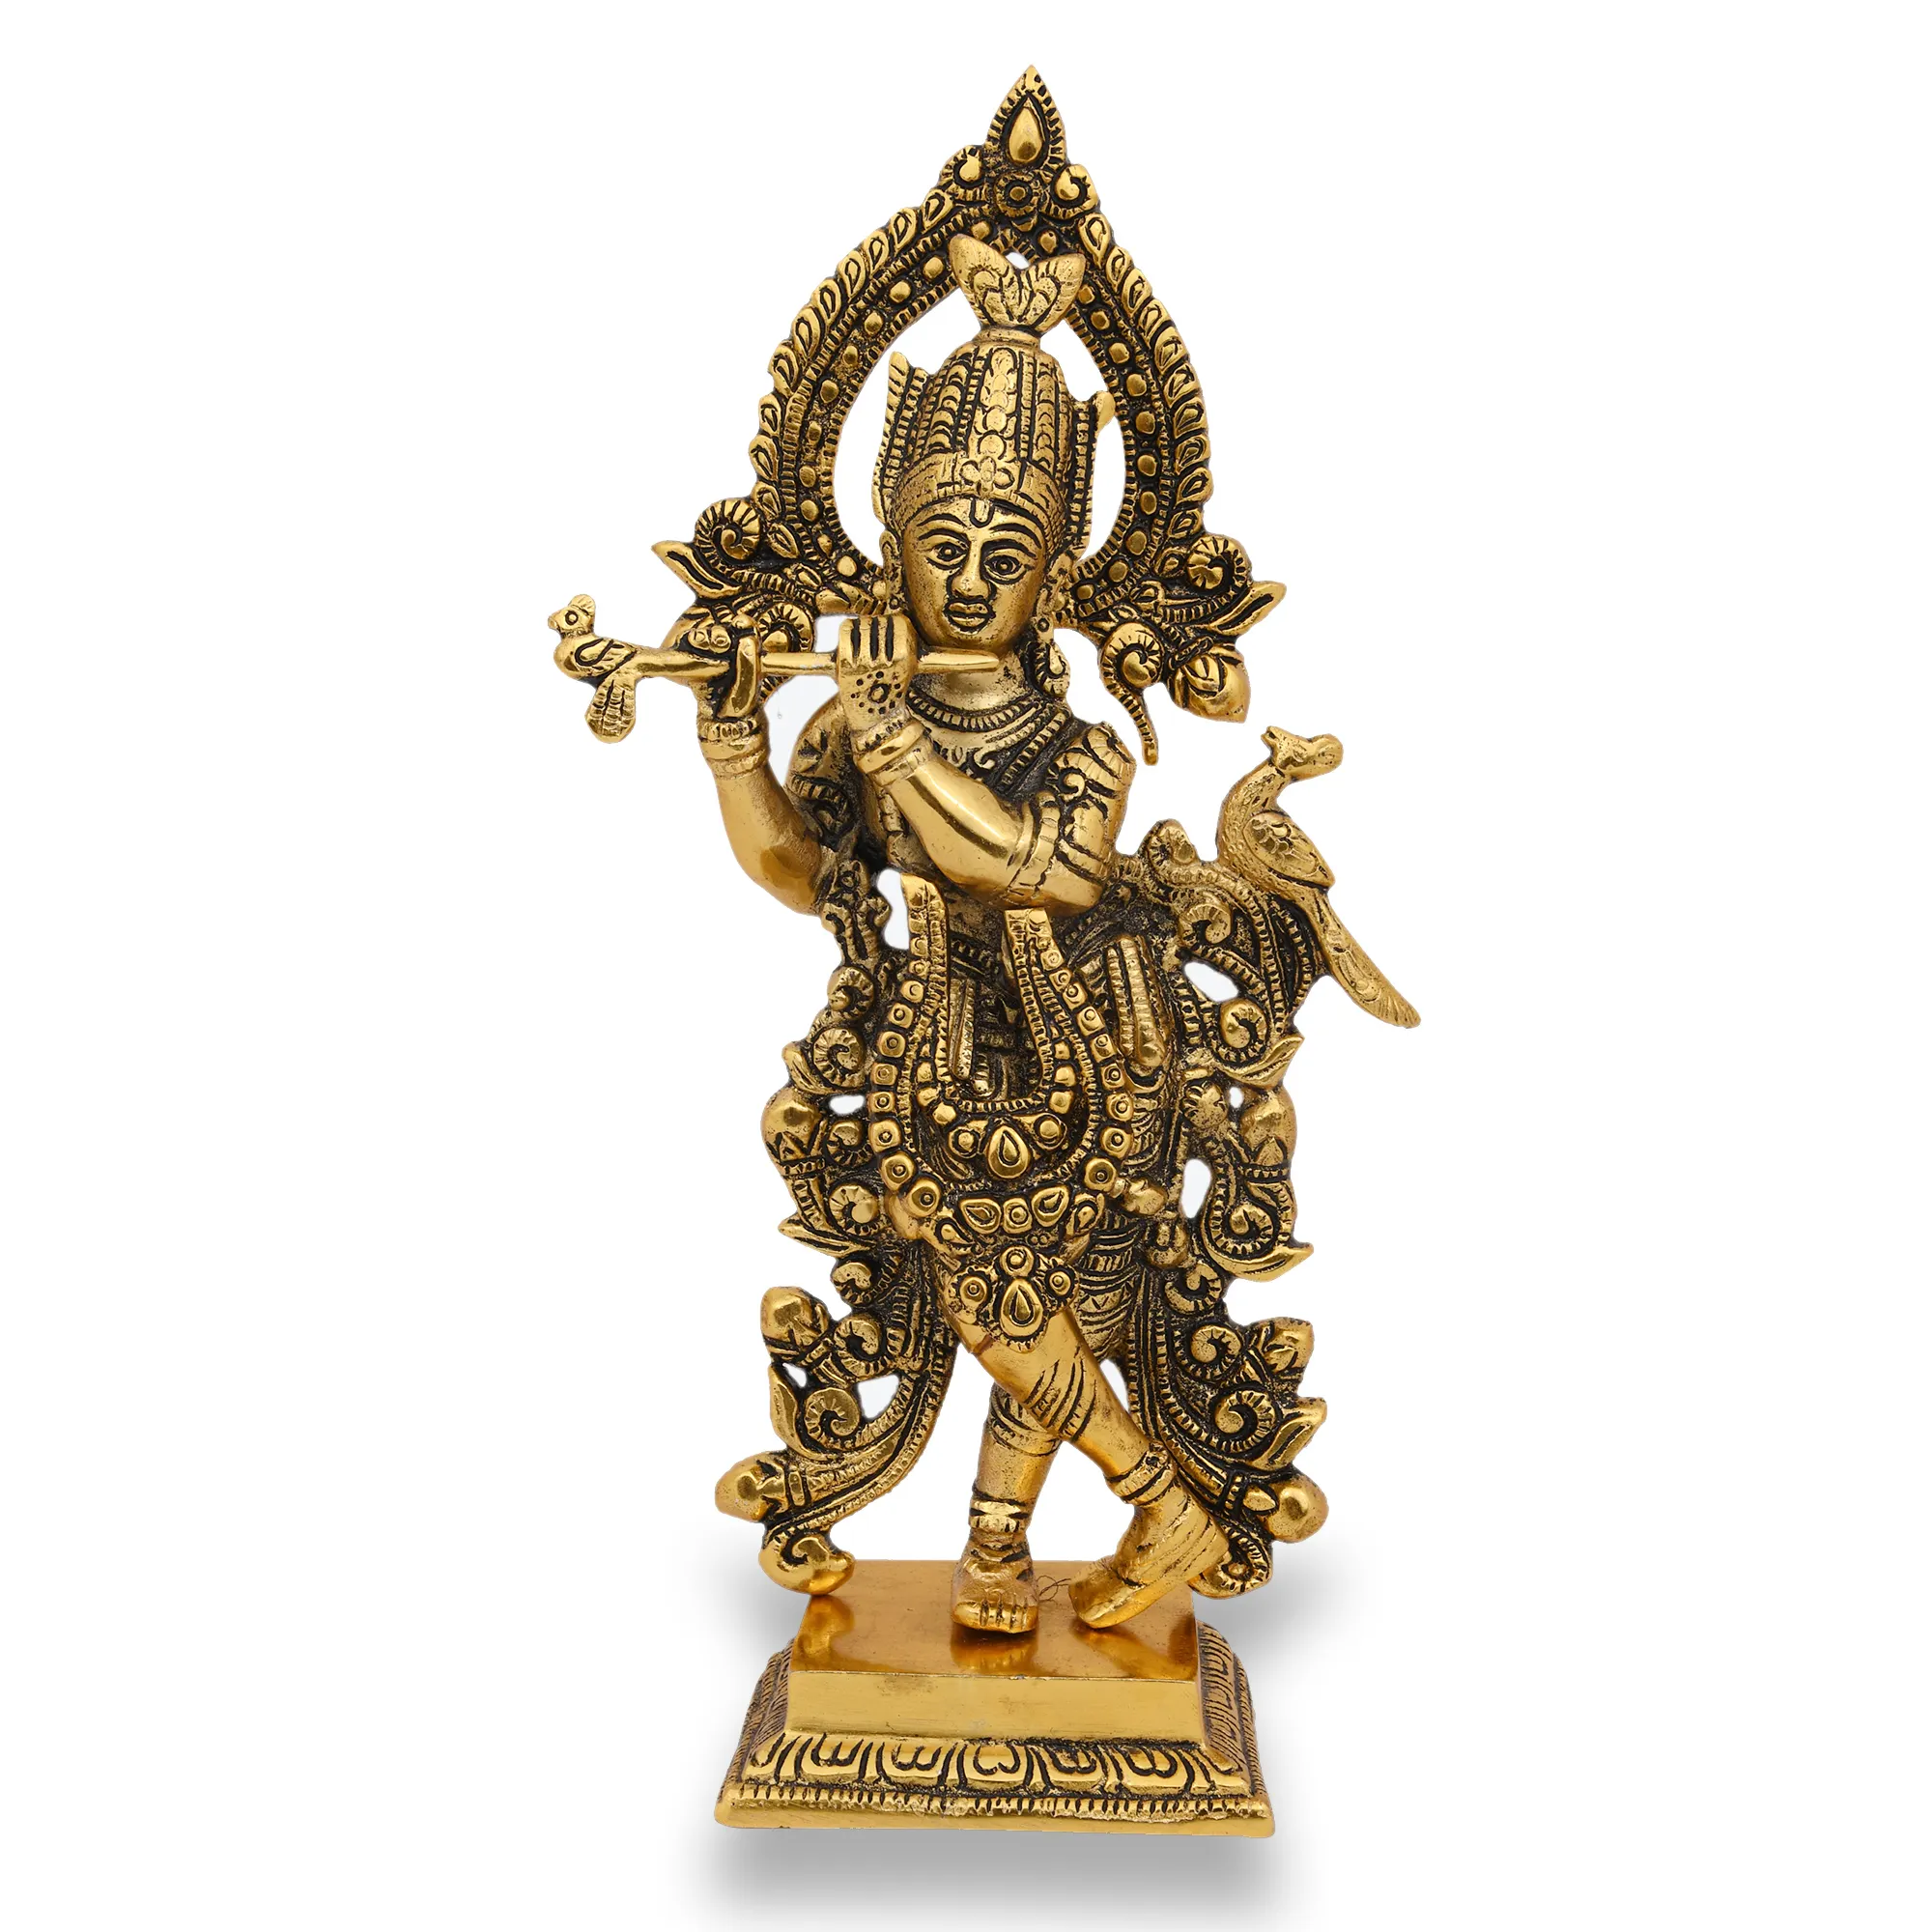 Handcrafted Metal Gold Plated Krishna Idol Statue Hindu God Sculpture Religious Gifts Item For Decoration And Gifting